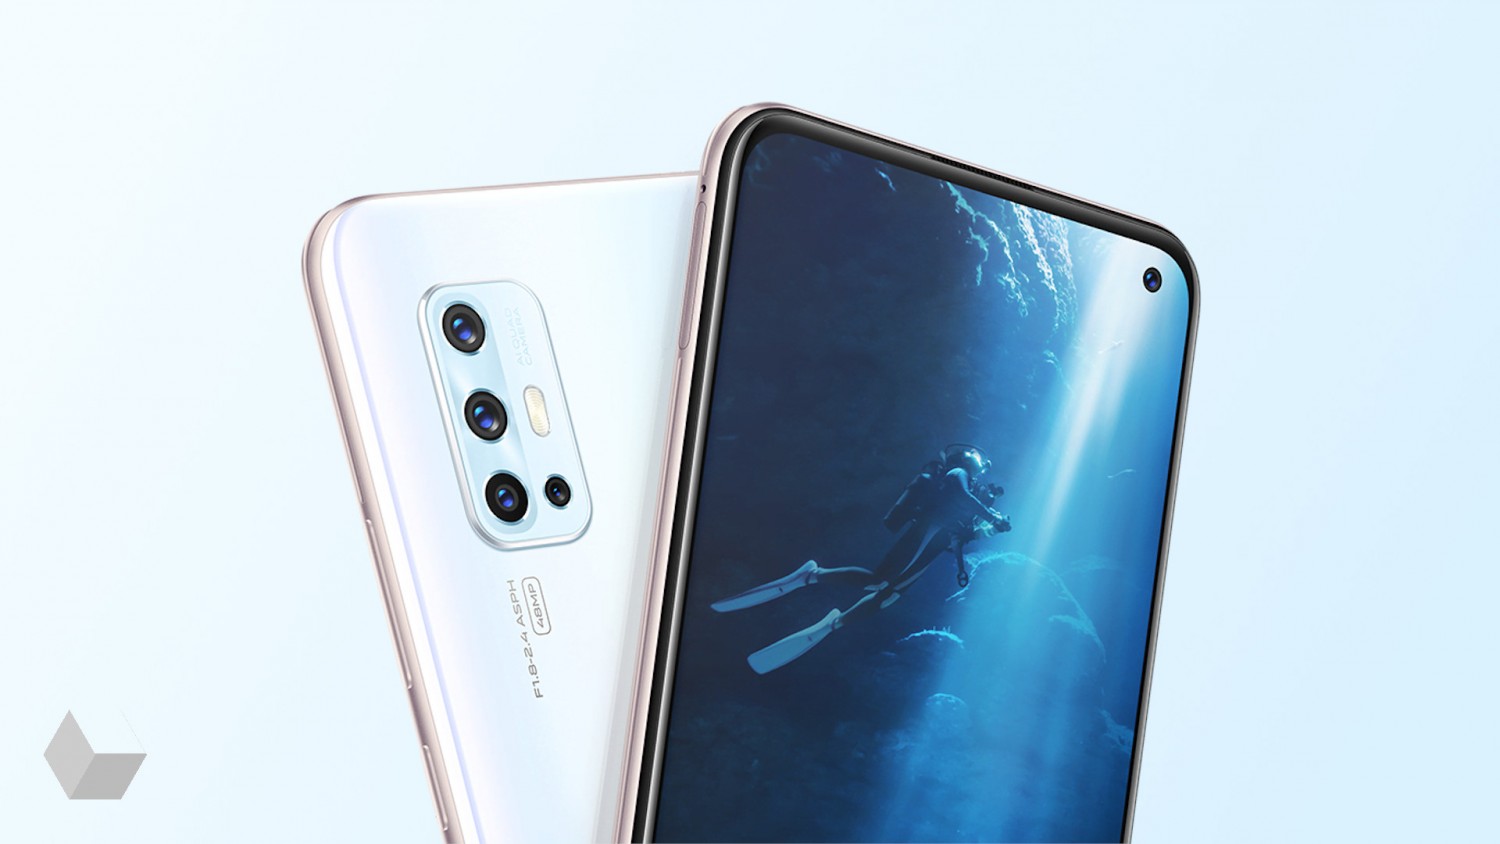 Review of the smartphone Vivo V19 with all the characteristics